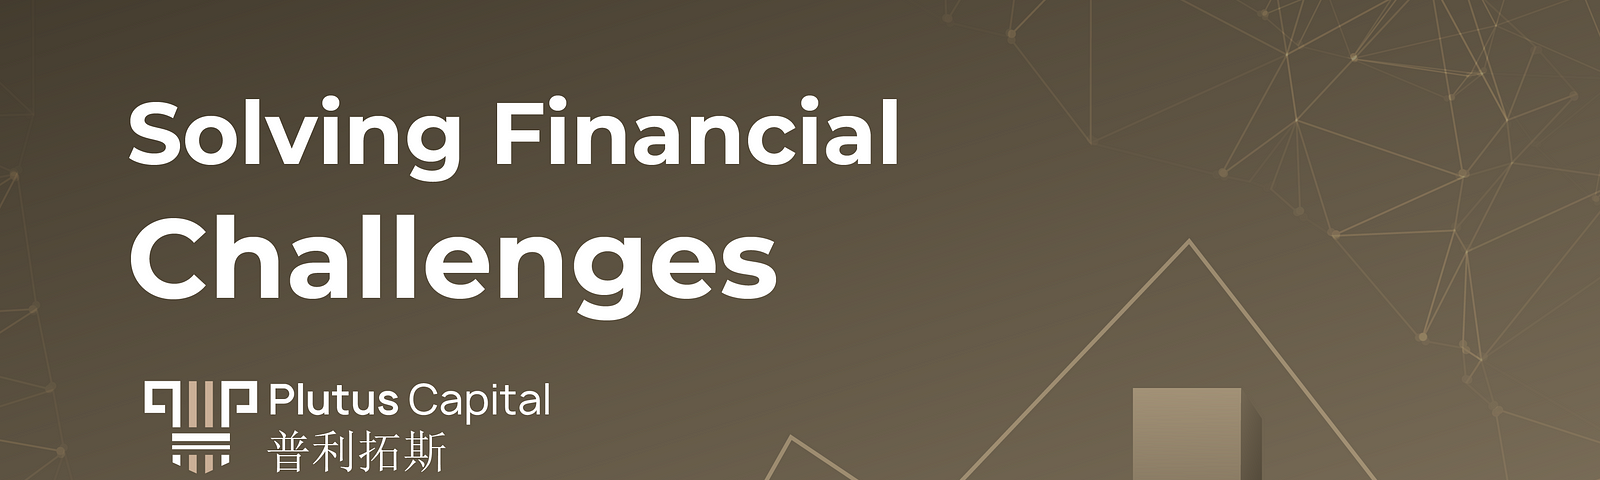 Solving Financial Challenges | Plutus Capital